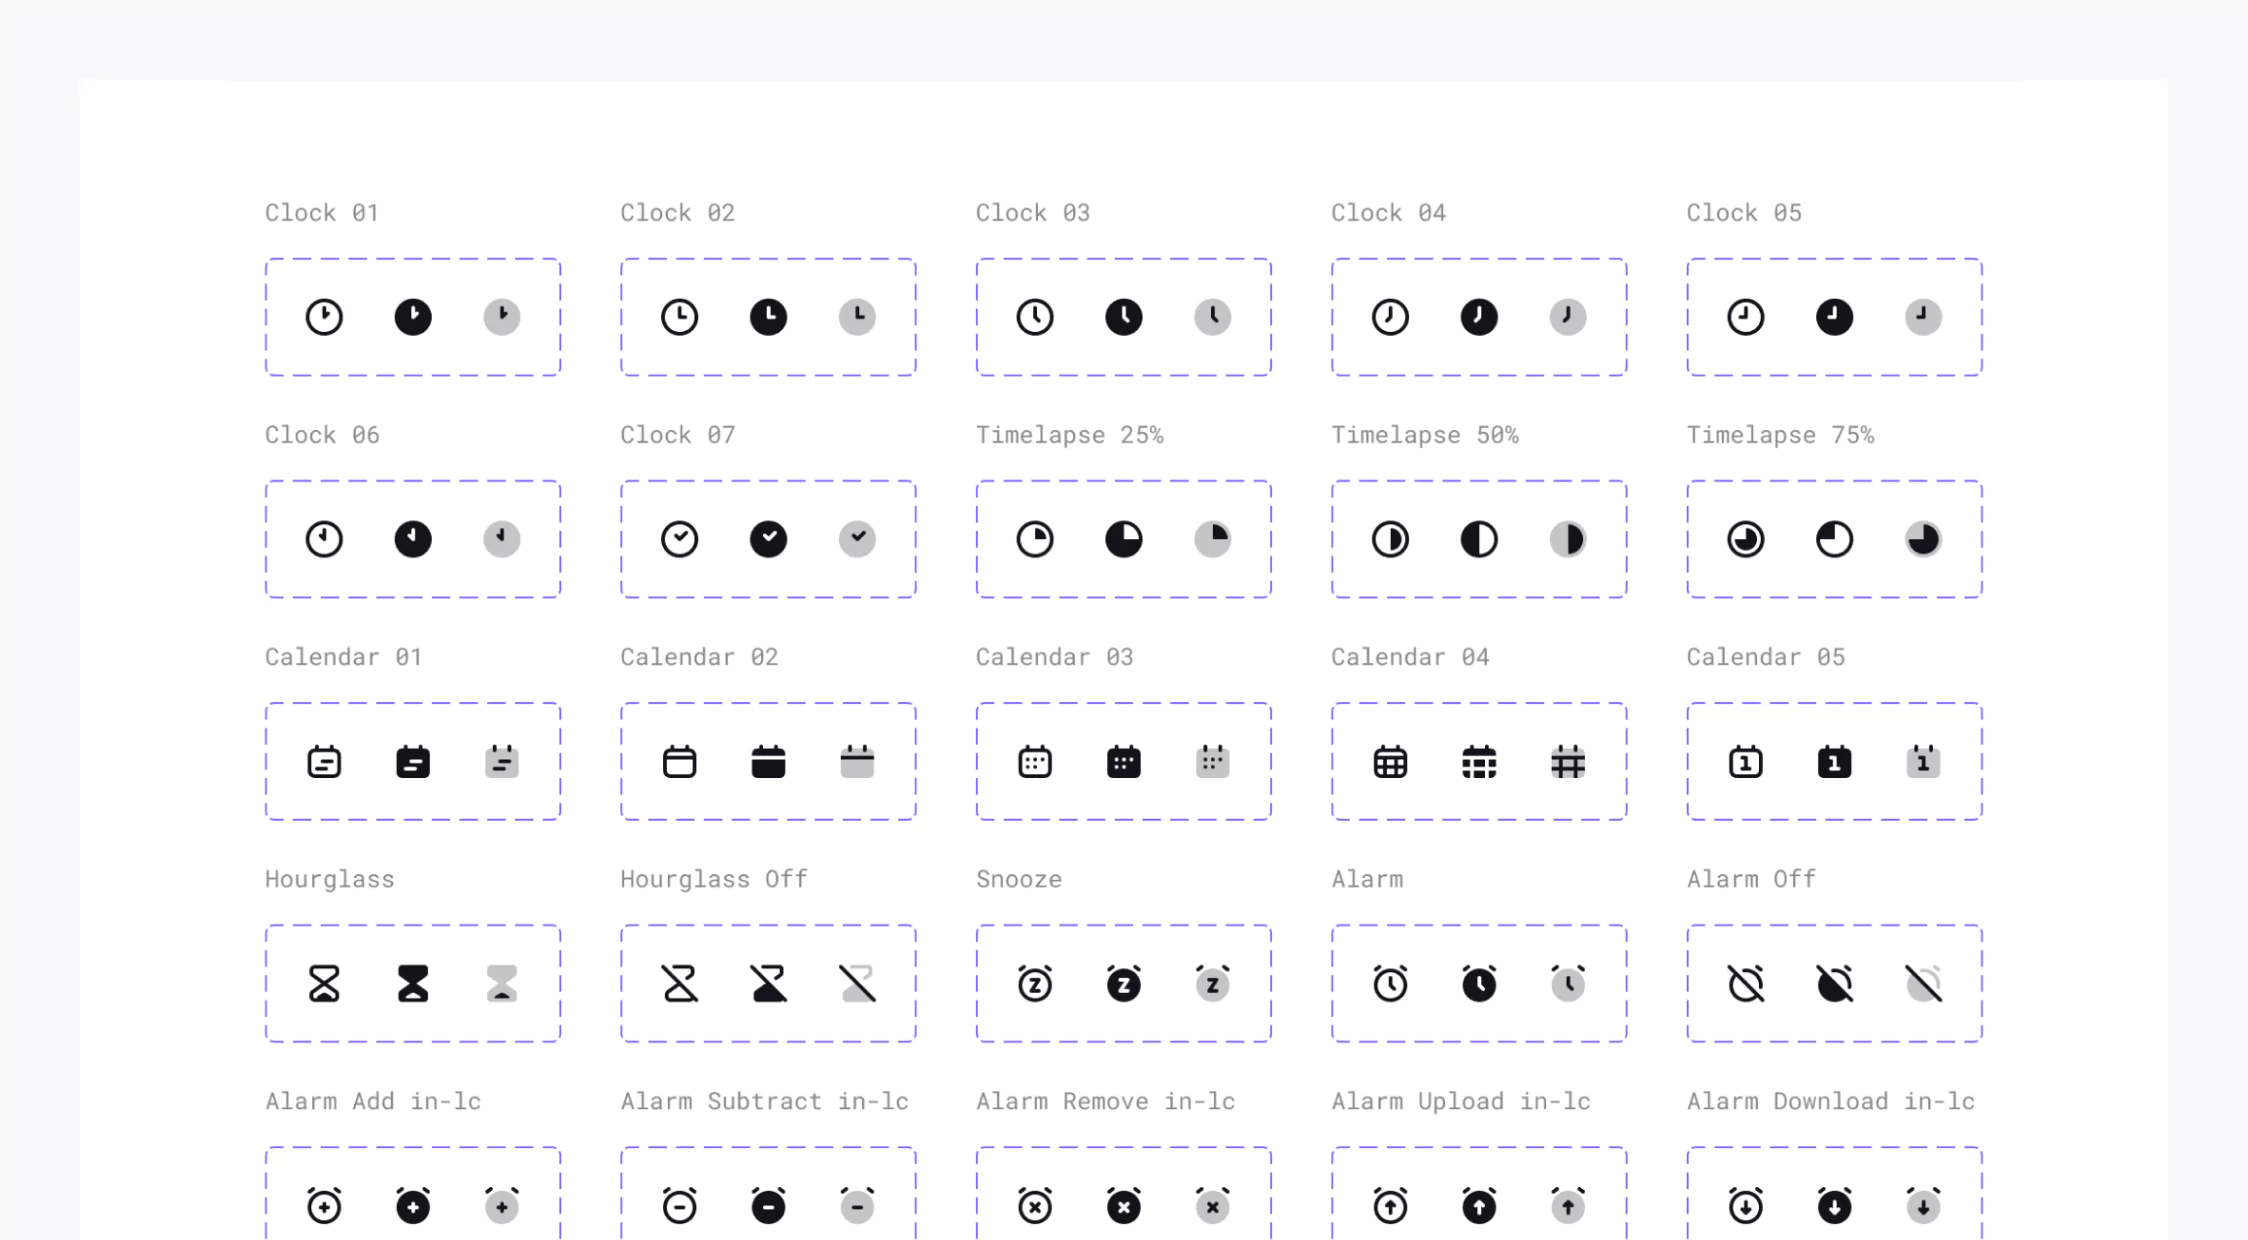 Date and Time icon set in Universal Icon Set in Figma. A set of date and time symbols, including various clocks, timelapse indicators, calendars, hourglasses, snooze, and alarm icons, each with different variations.